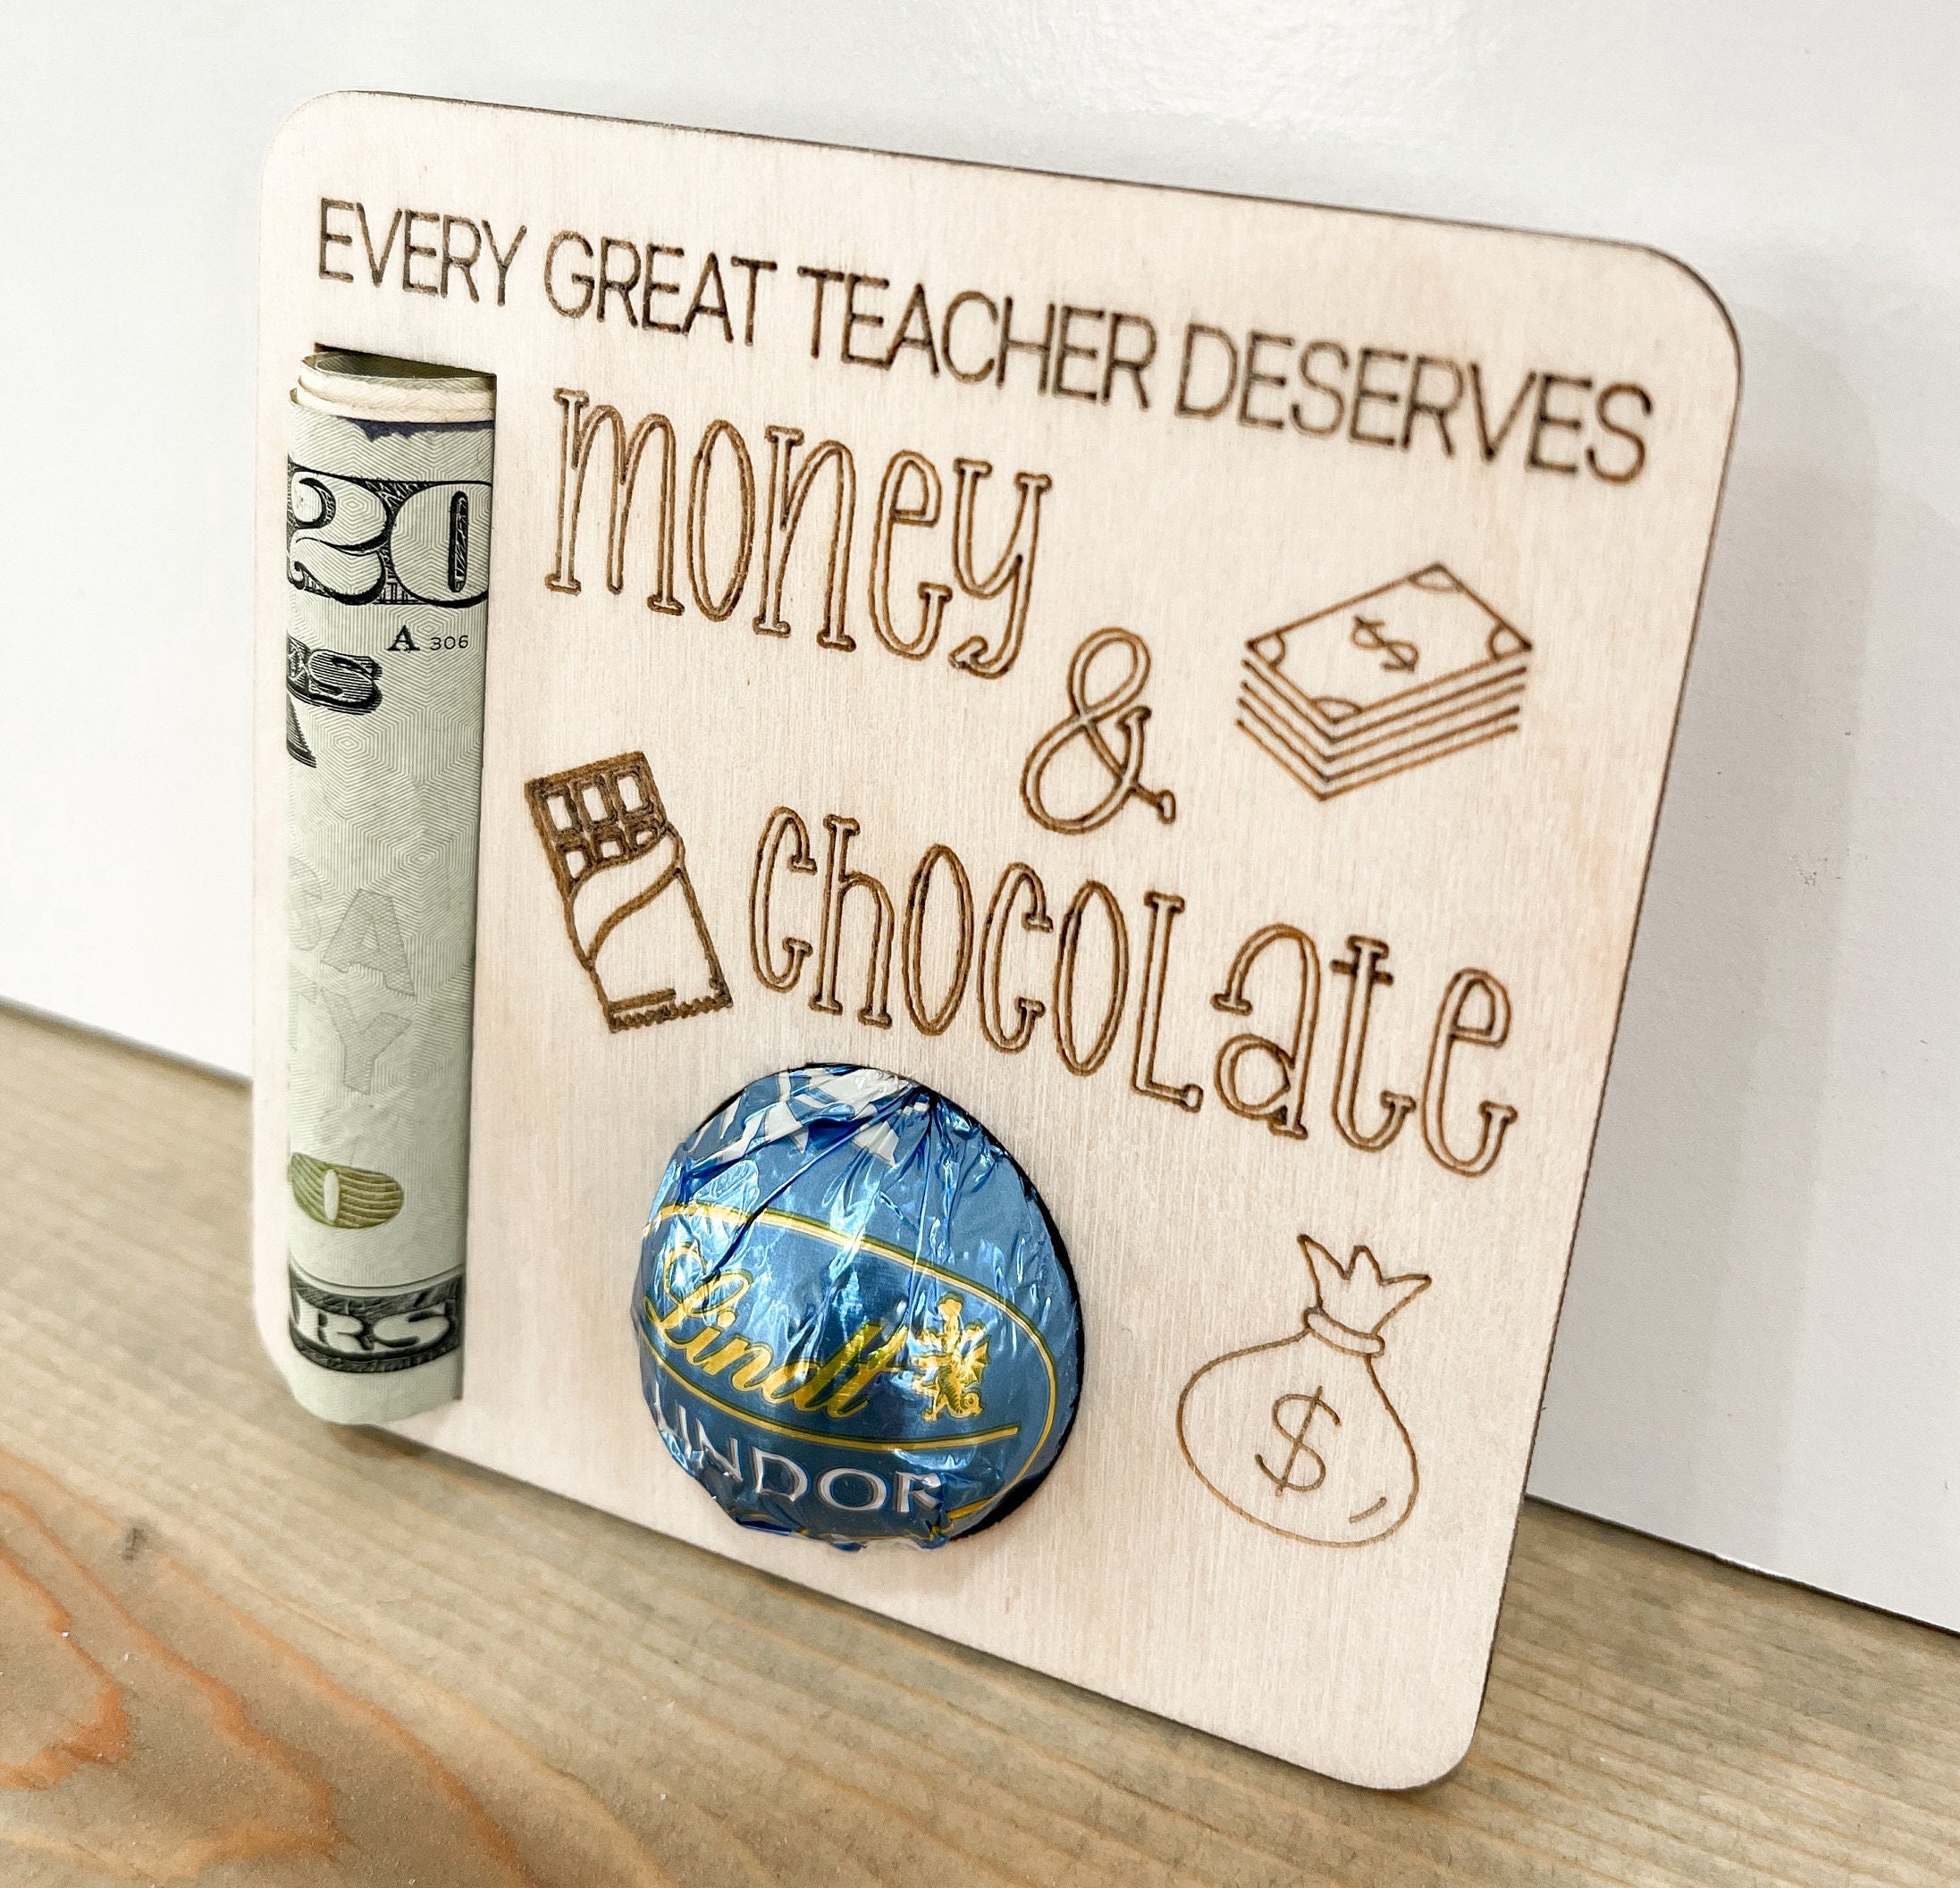 Glowforge Laser Cutter - Print gifts, cards, decor from wood, acrylic,  chocolate. App, camera, wifi. Just click to cut.